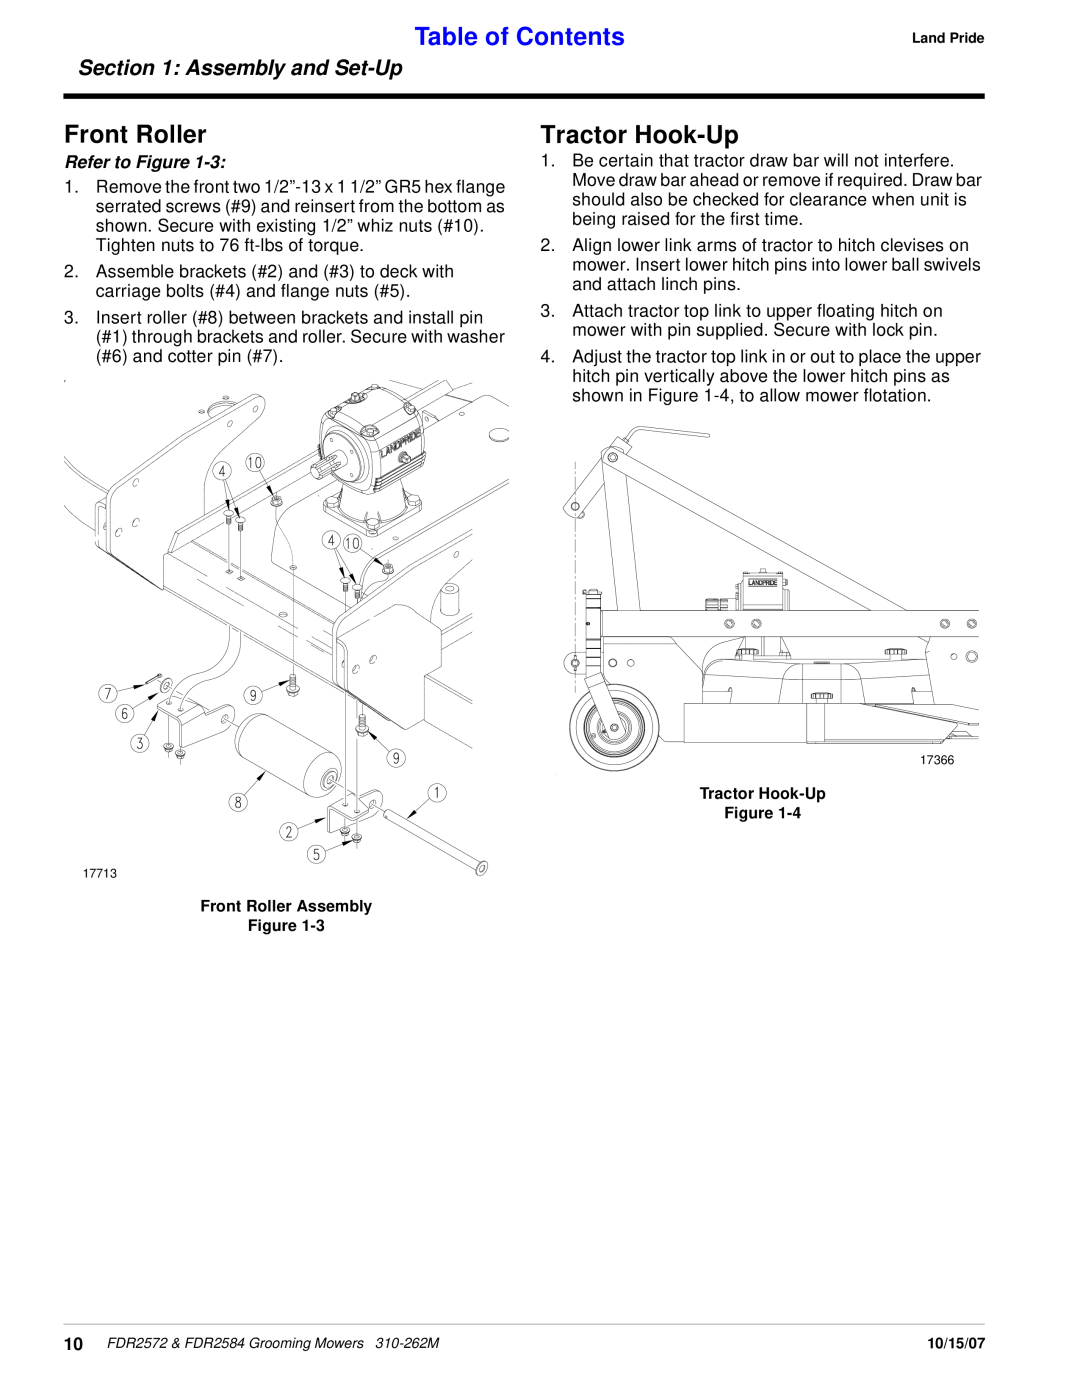 Land Pride FDR2572, FDR2584 manual Front Roller, Tractor Hook-Up, Table of Contents, Assembly and Set-Up, Refer to Figure 